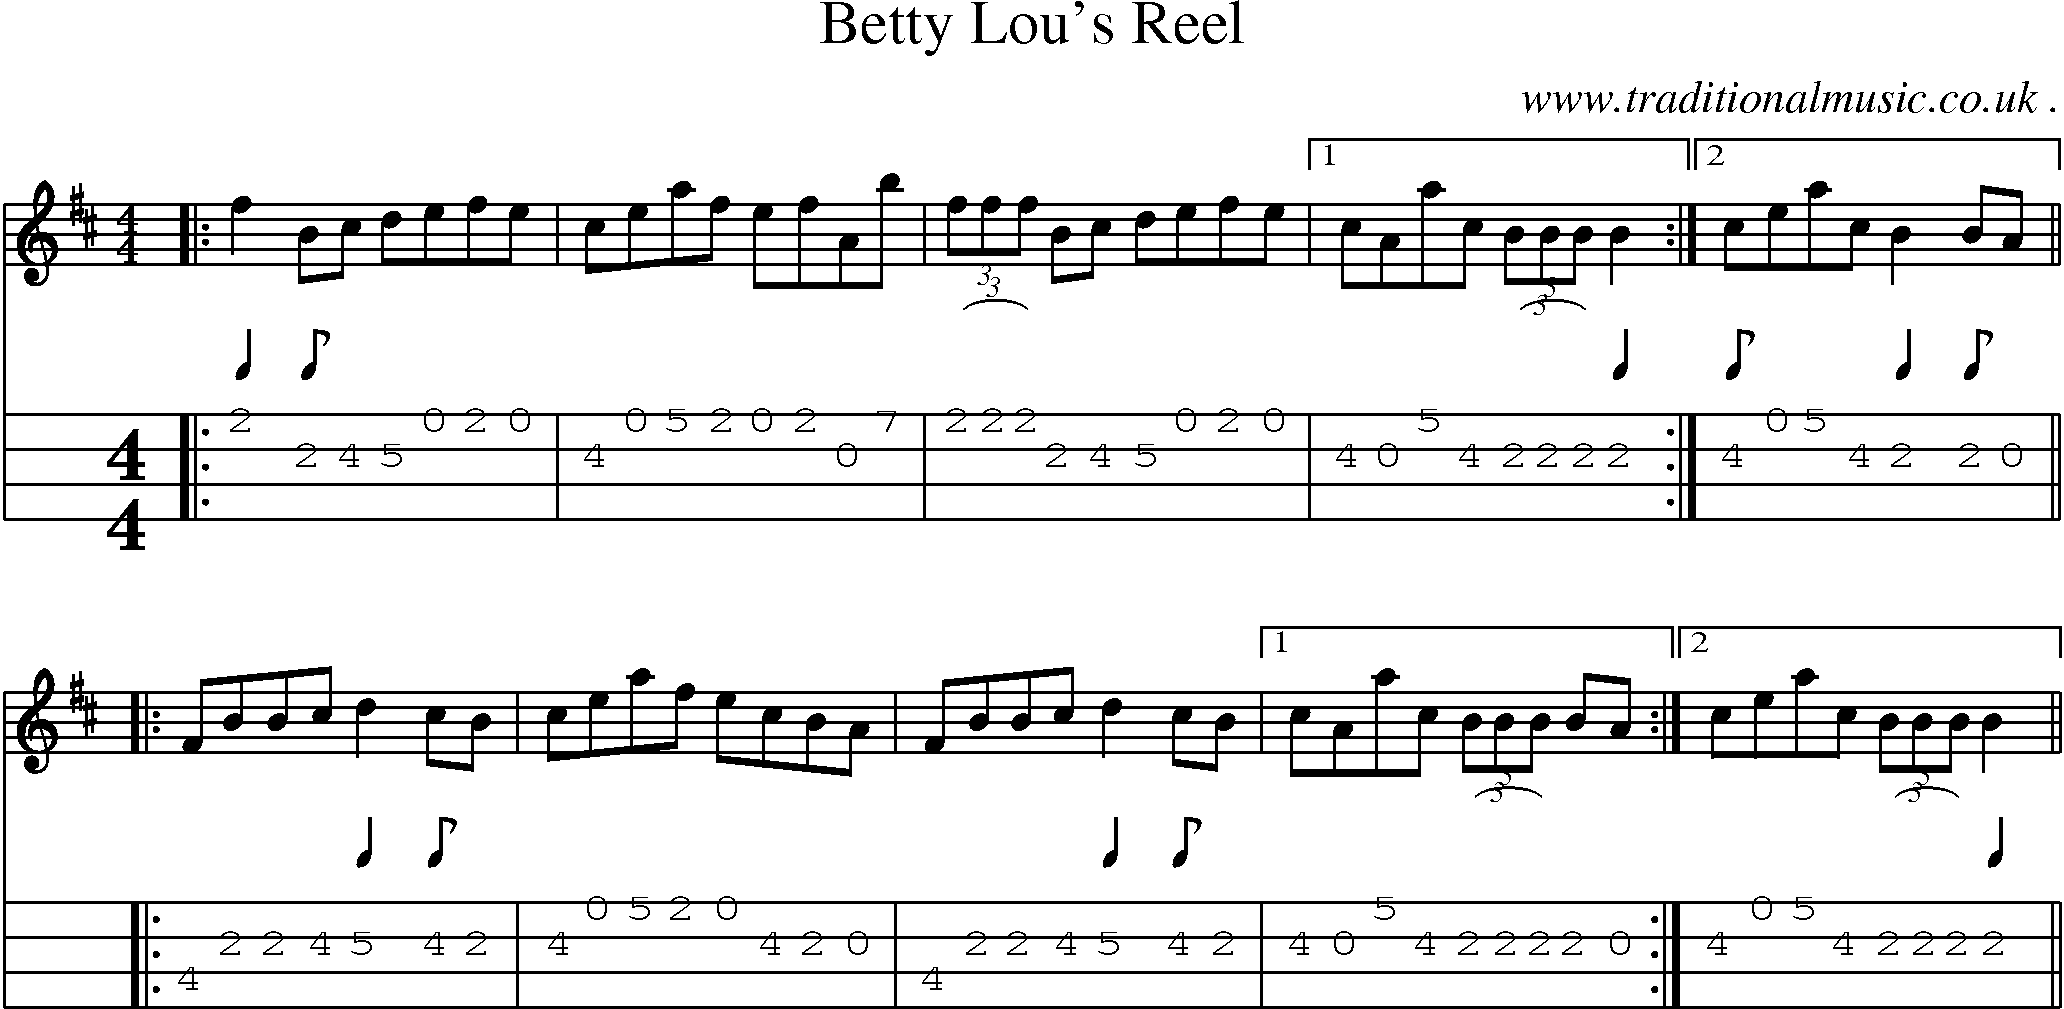 Music Score and Mandolin Tabs for Betty Lous Reel